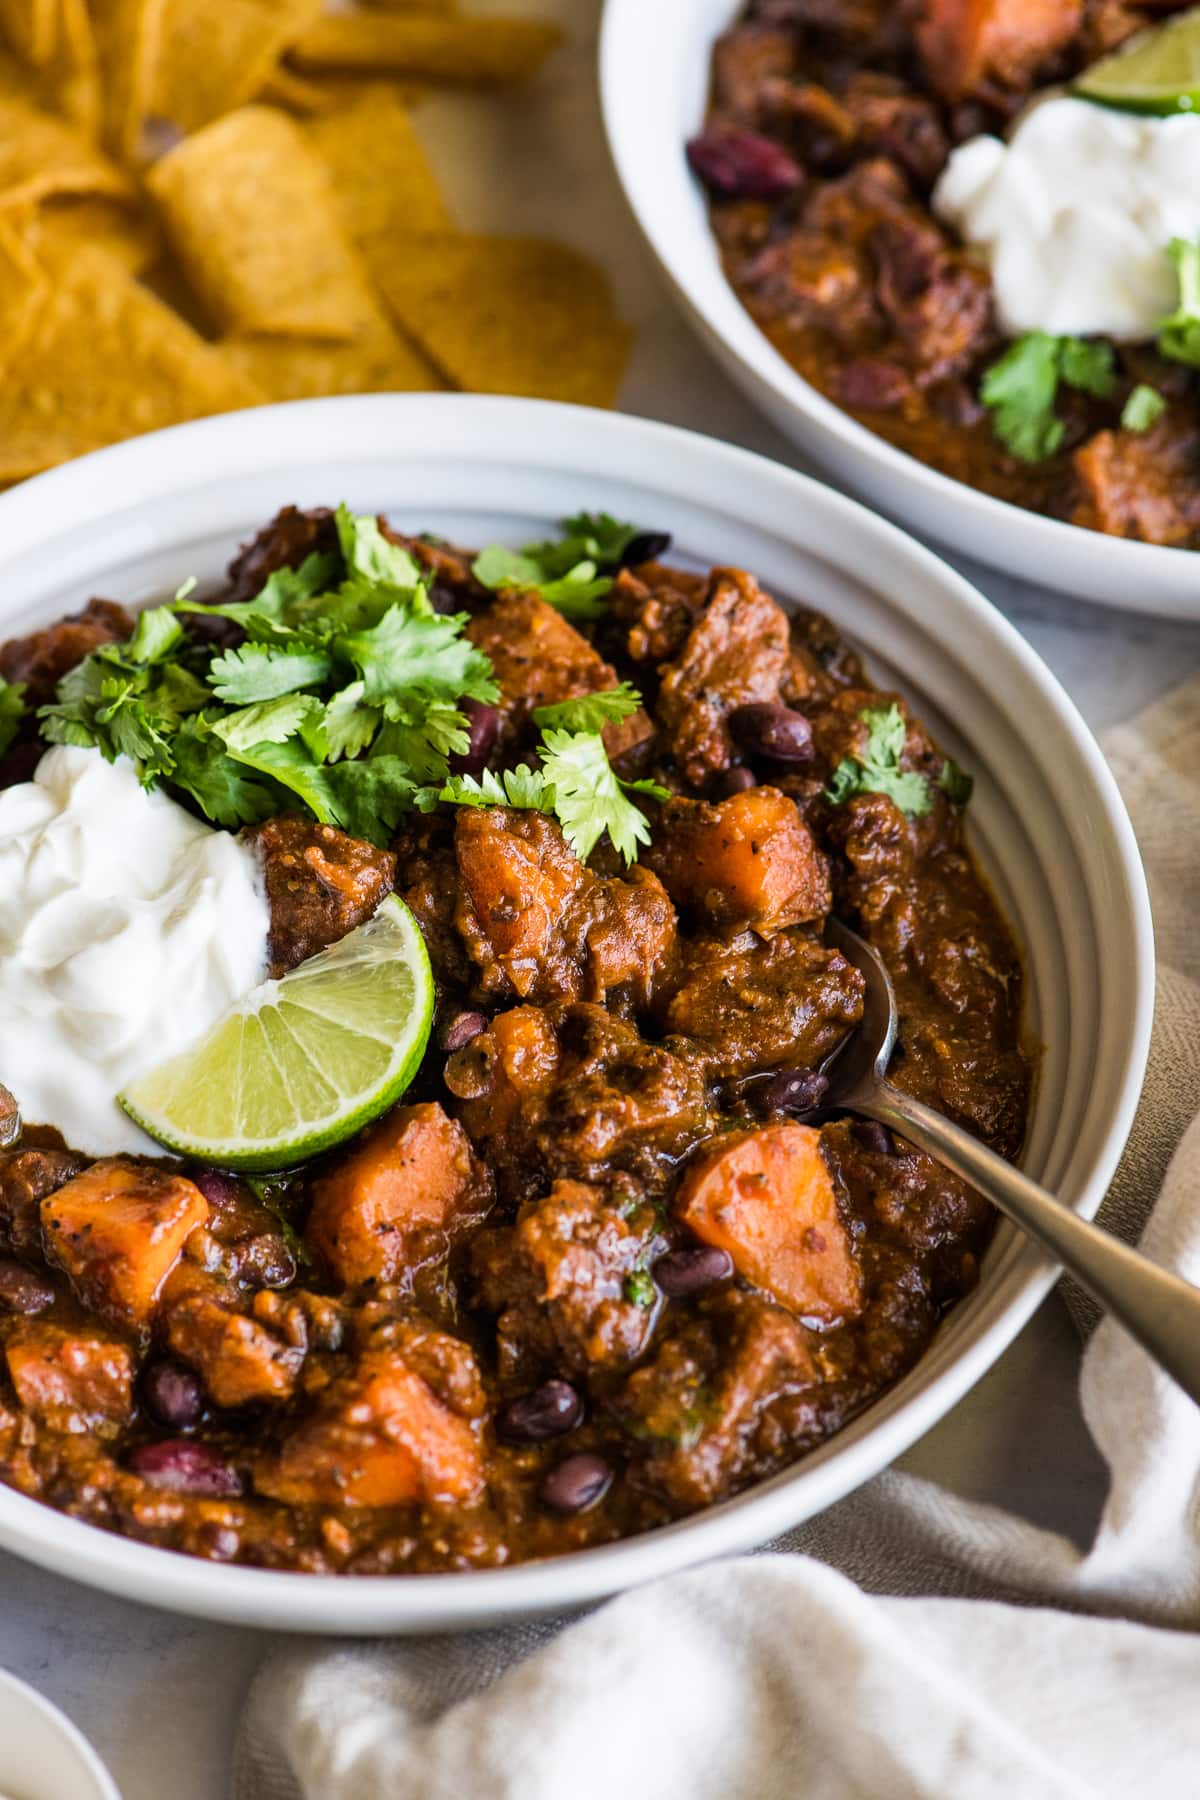 Chipotle Sweet Potato Pork Chili topped with sour cream, cilantro, and a lime wedge.